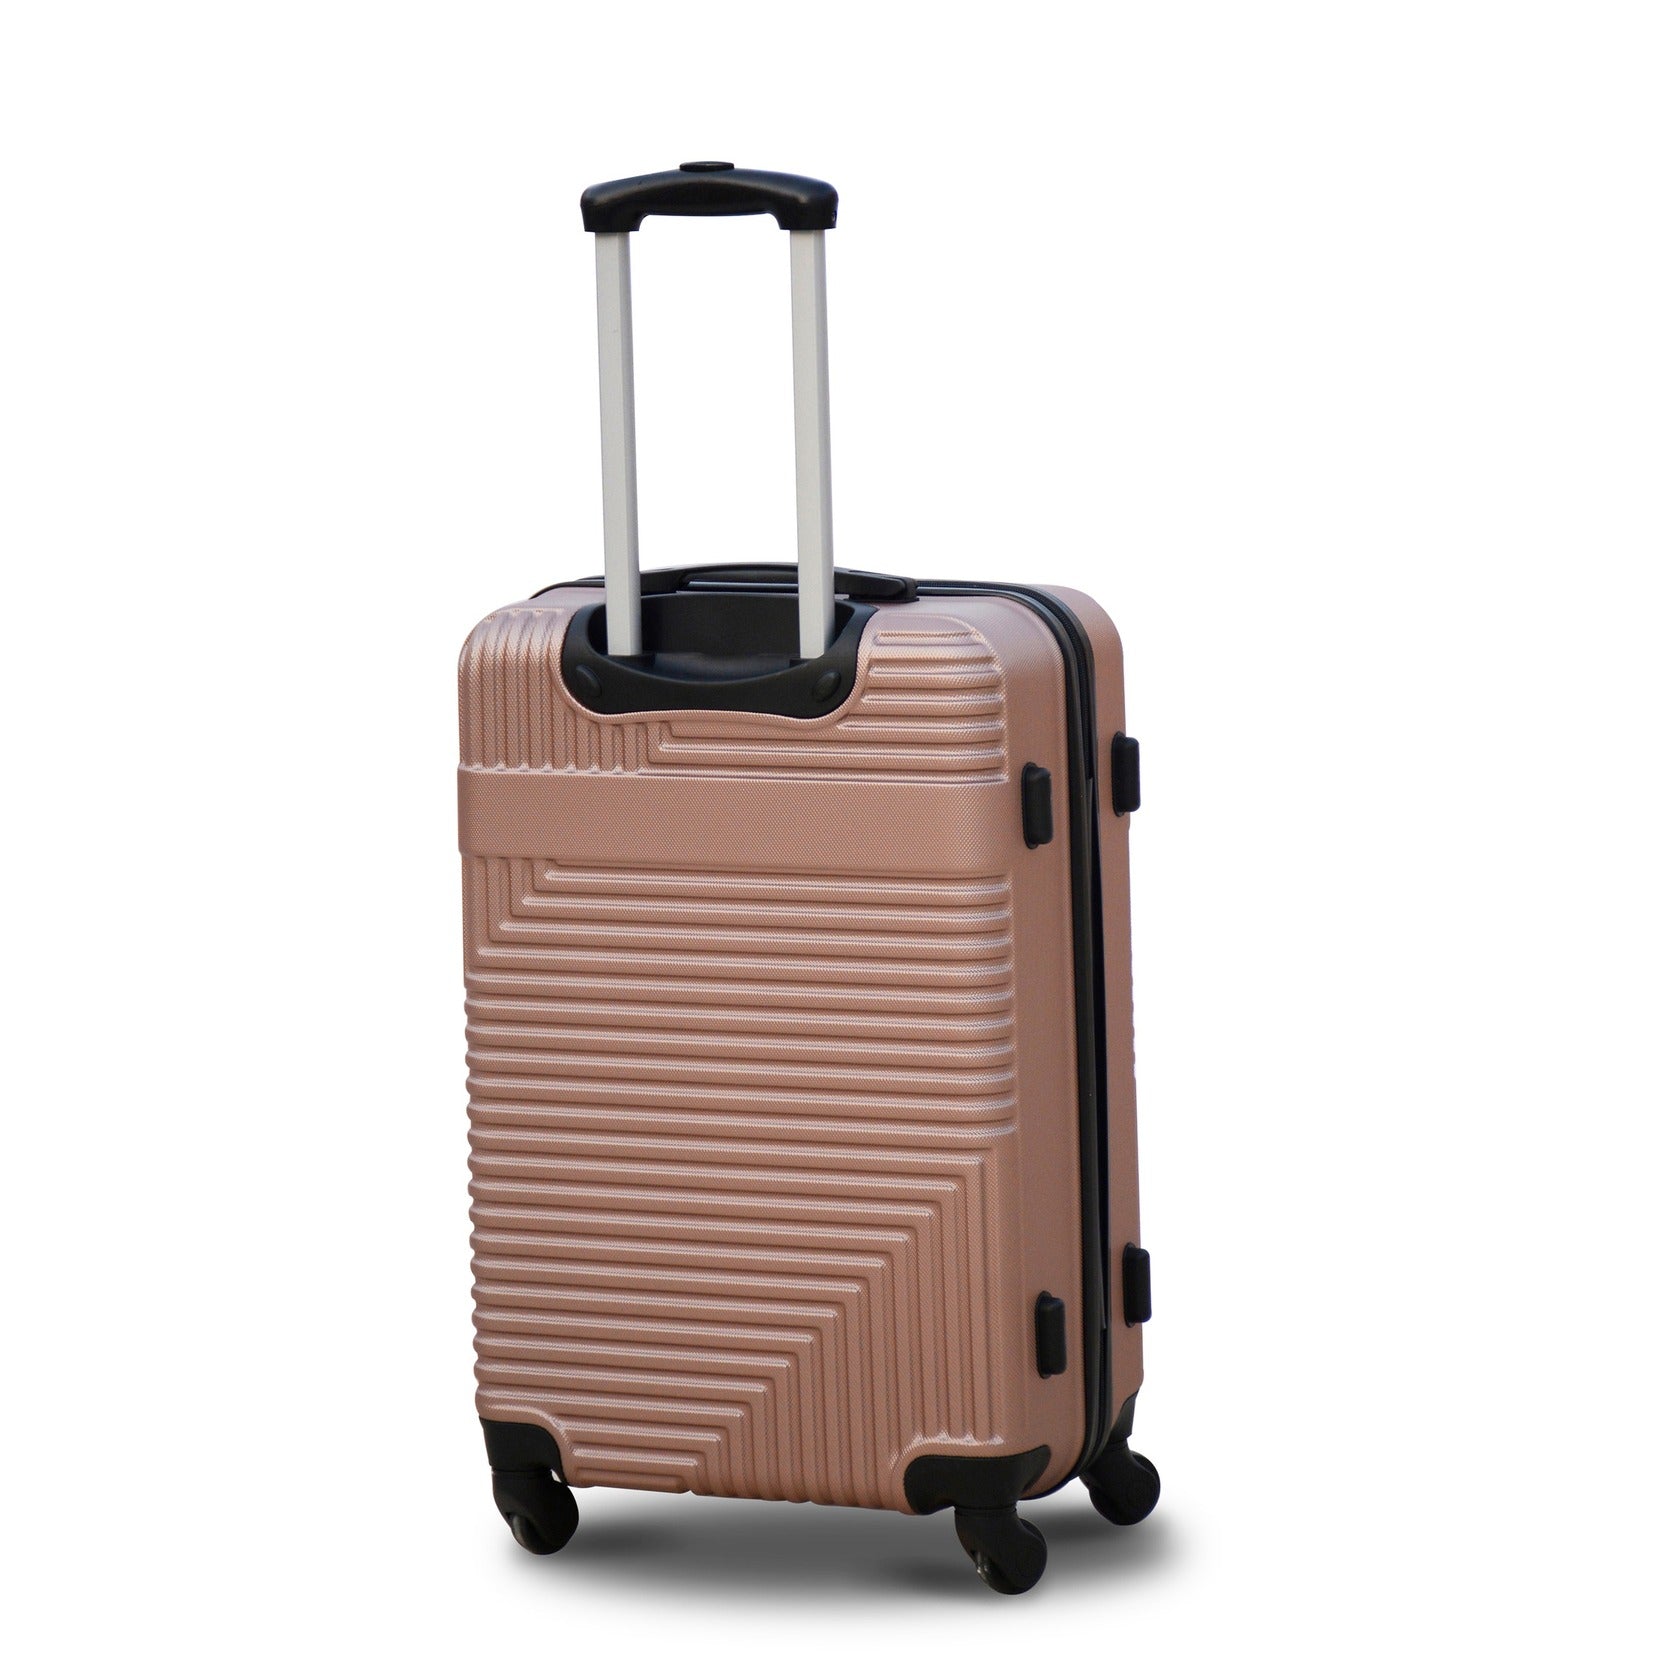 24" Rose Gold Colour Travel Way ABS Luggage Lightweight Hard Case Trolley Bag | 2 Year Warranty